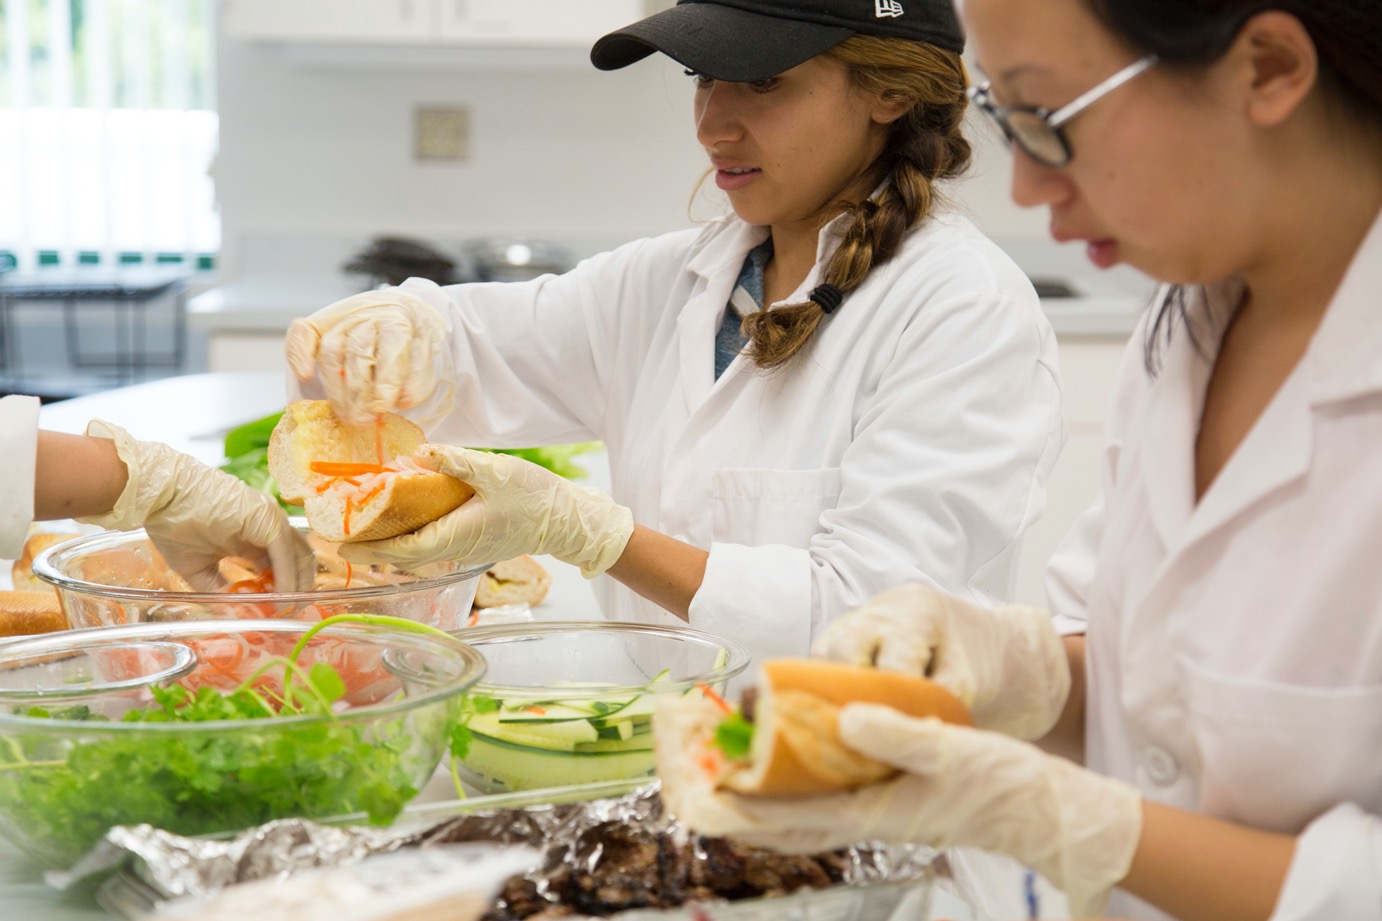 A female student in a white lab coat with a braided side ponytail and a black baseball cap stands behind another student in a white lab coat wearing glasses. Both students are prepare sandwiches. In the background is a blurred kitchen setting.